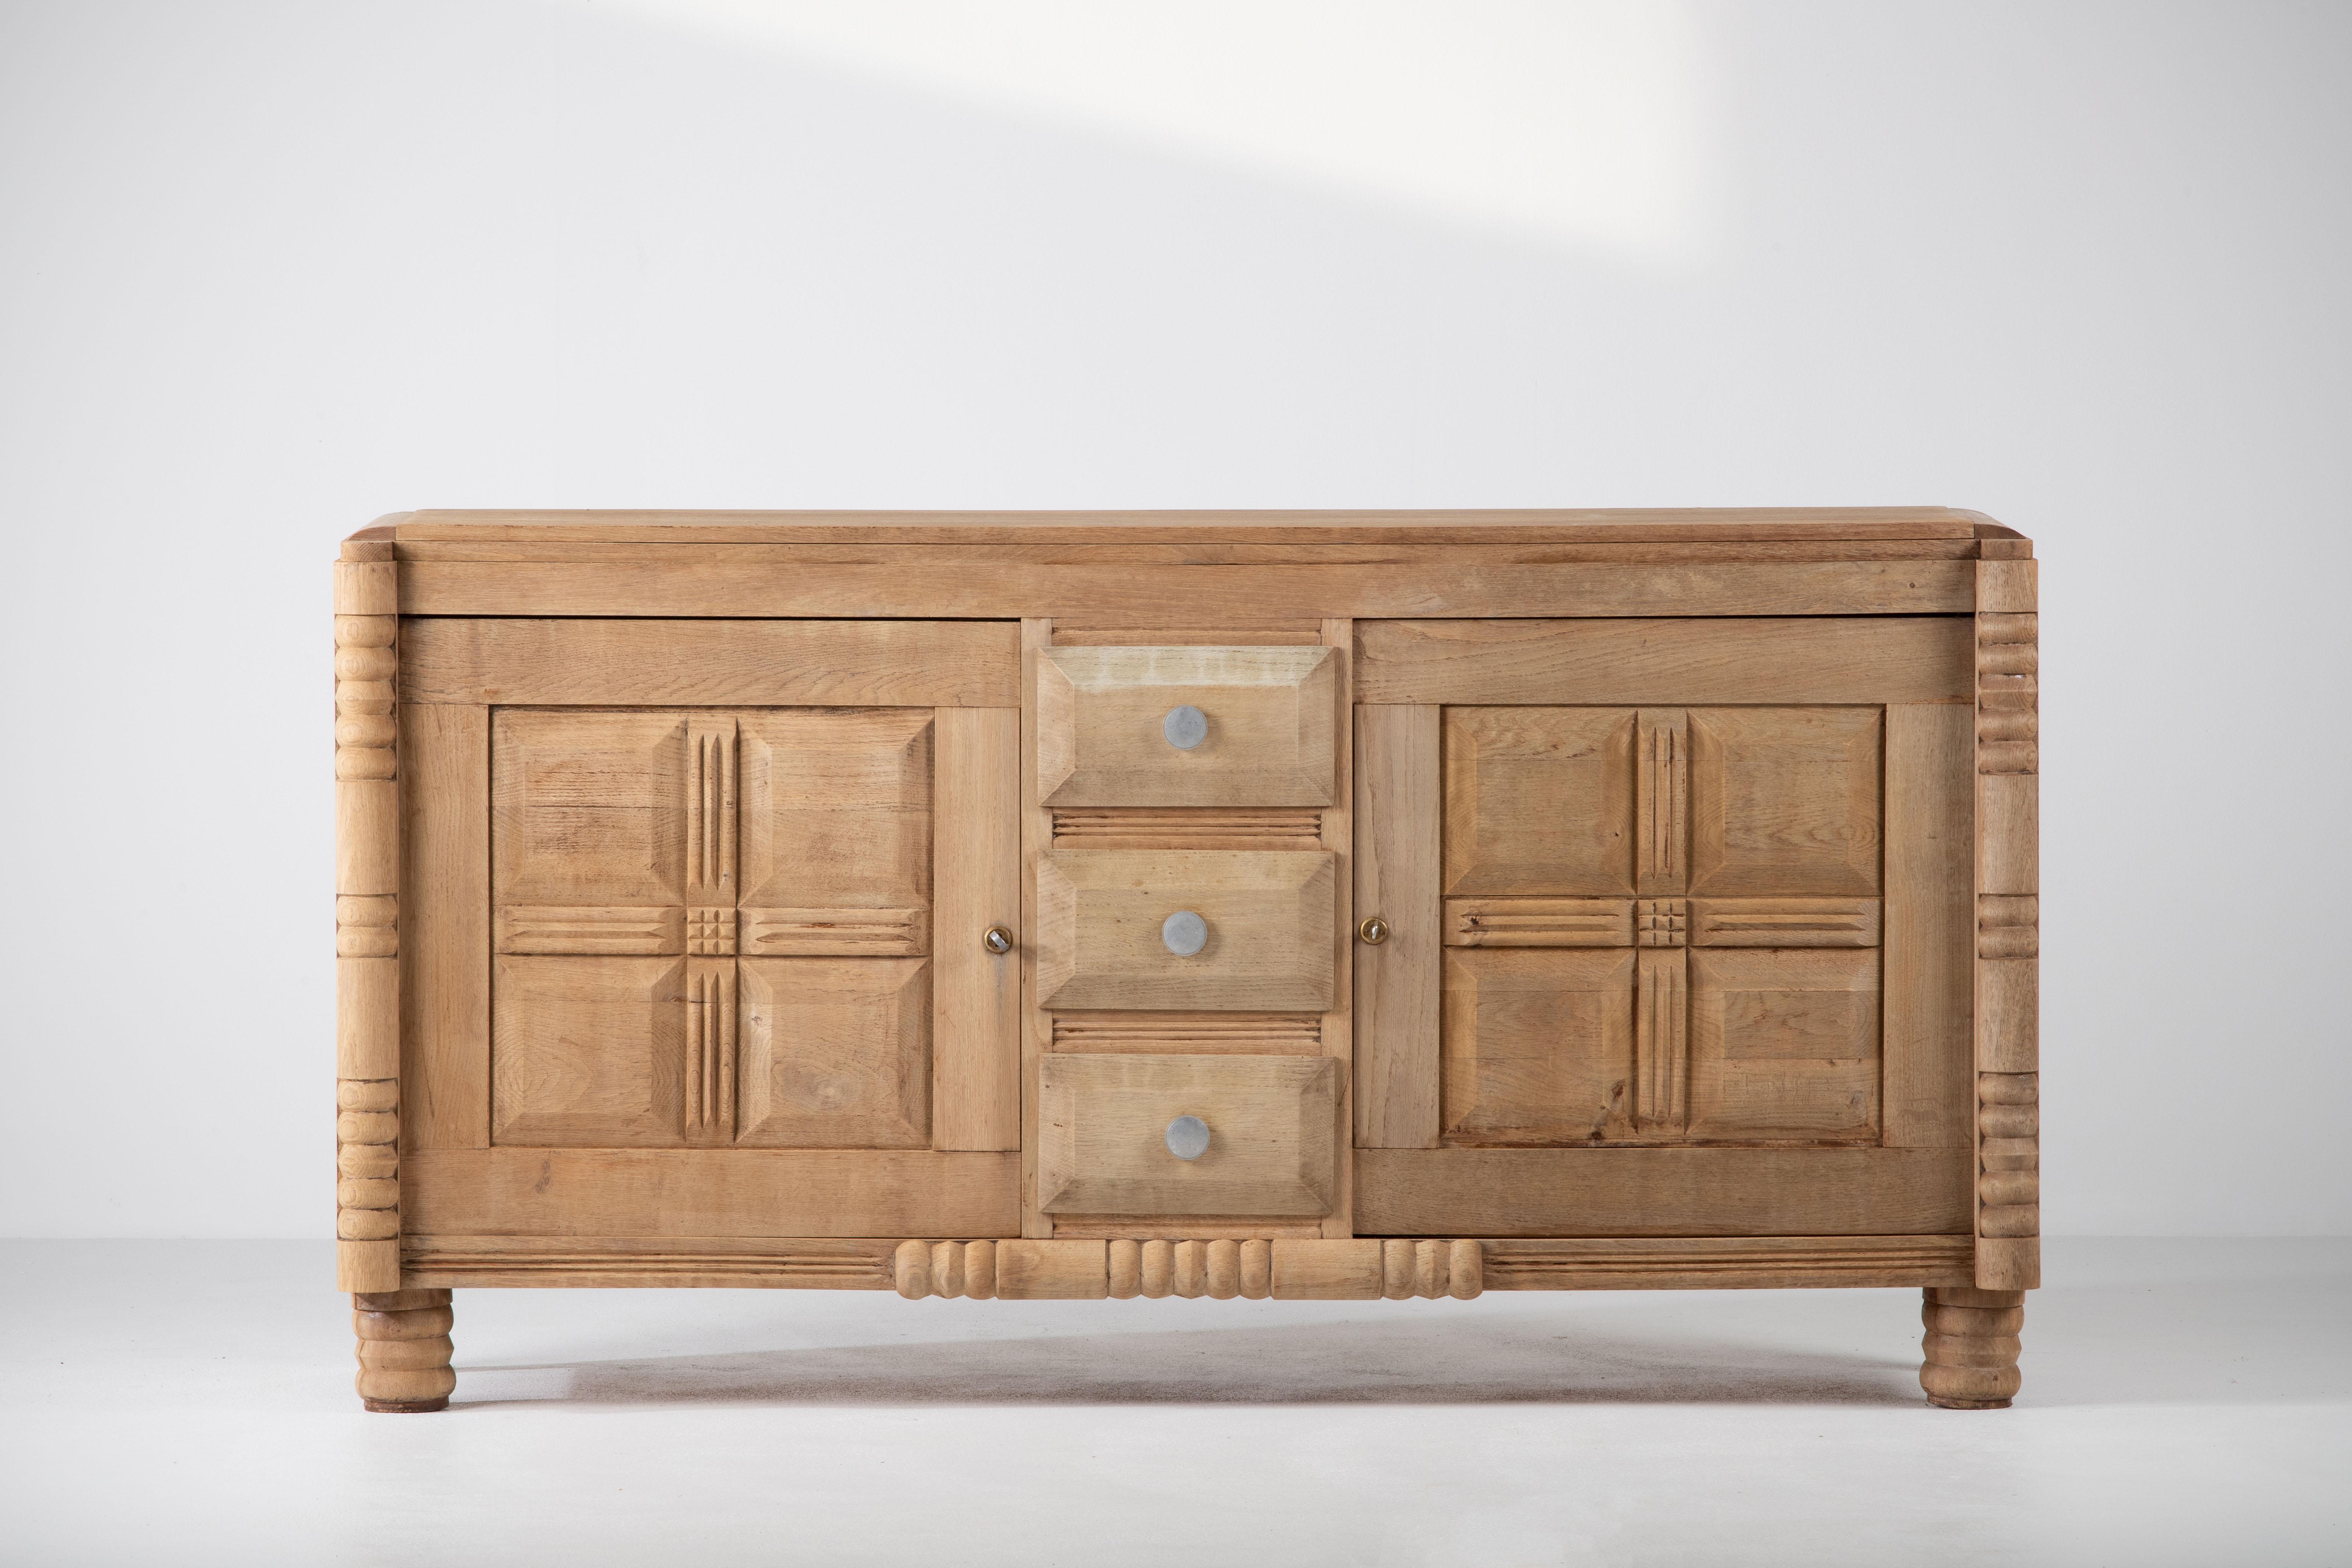 Very elegant Credenza in solid oak, France, 1940s.
Art Deco Brutalist sideboard. 
The credenza consists of Two storage facilities covered with graphic designed doors and a column of drawers.
The refined wooden structures on the doors create a